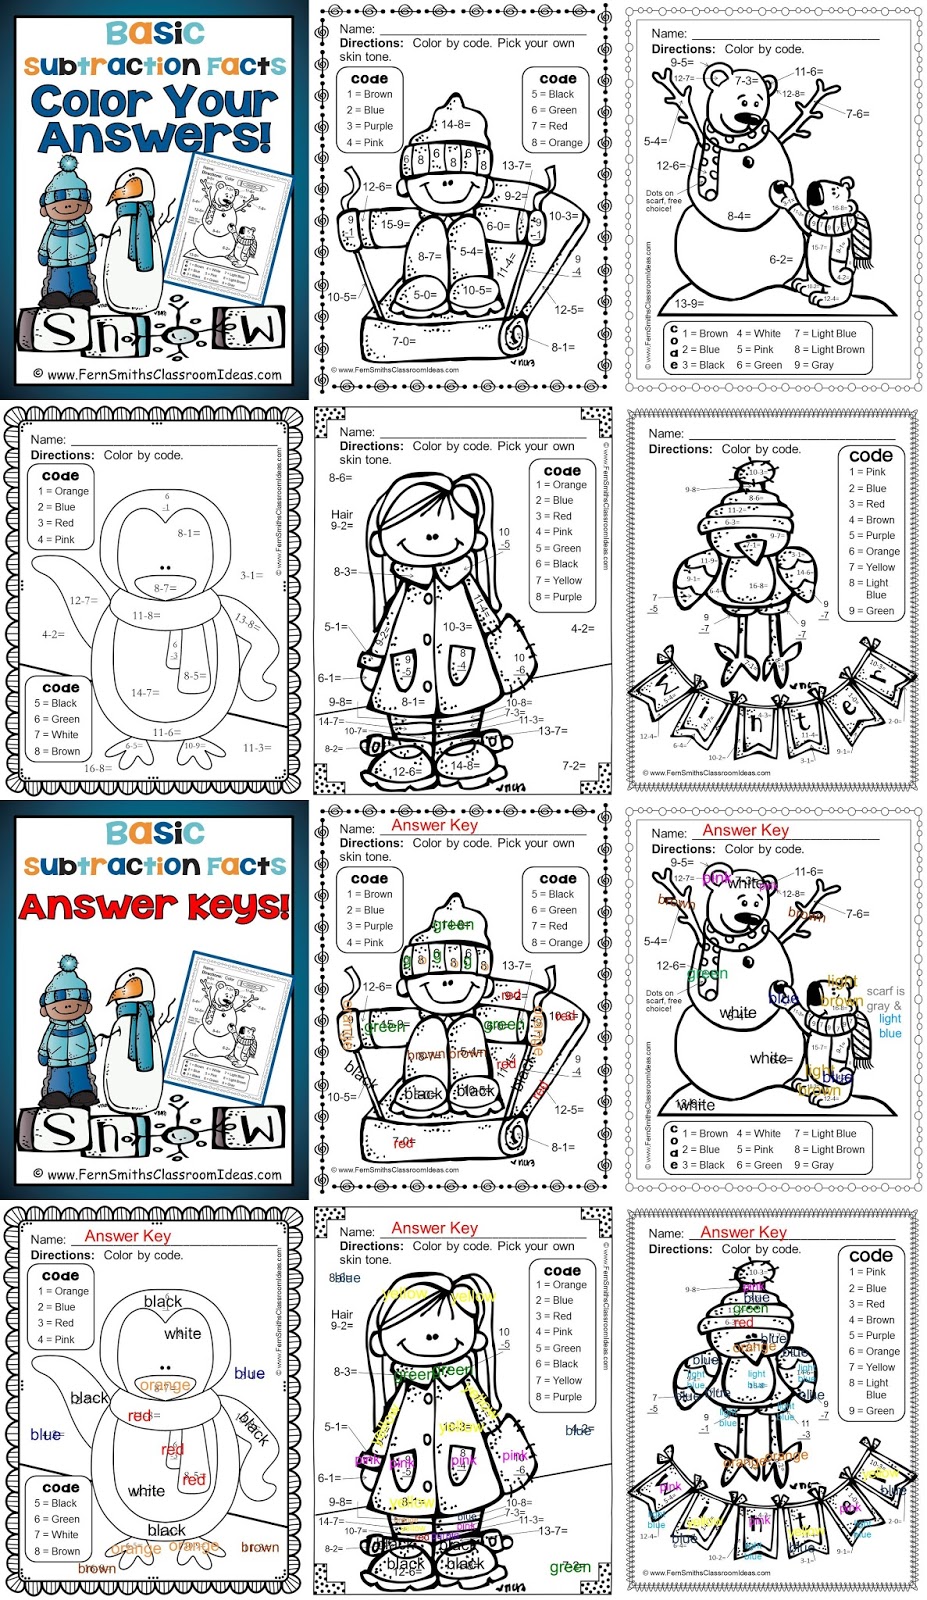 Winter Fun! Basic Subtraction Facts - Color Your Answers Printables